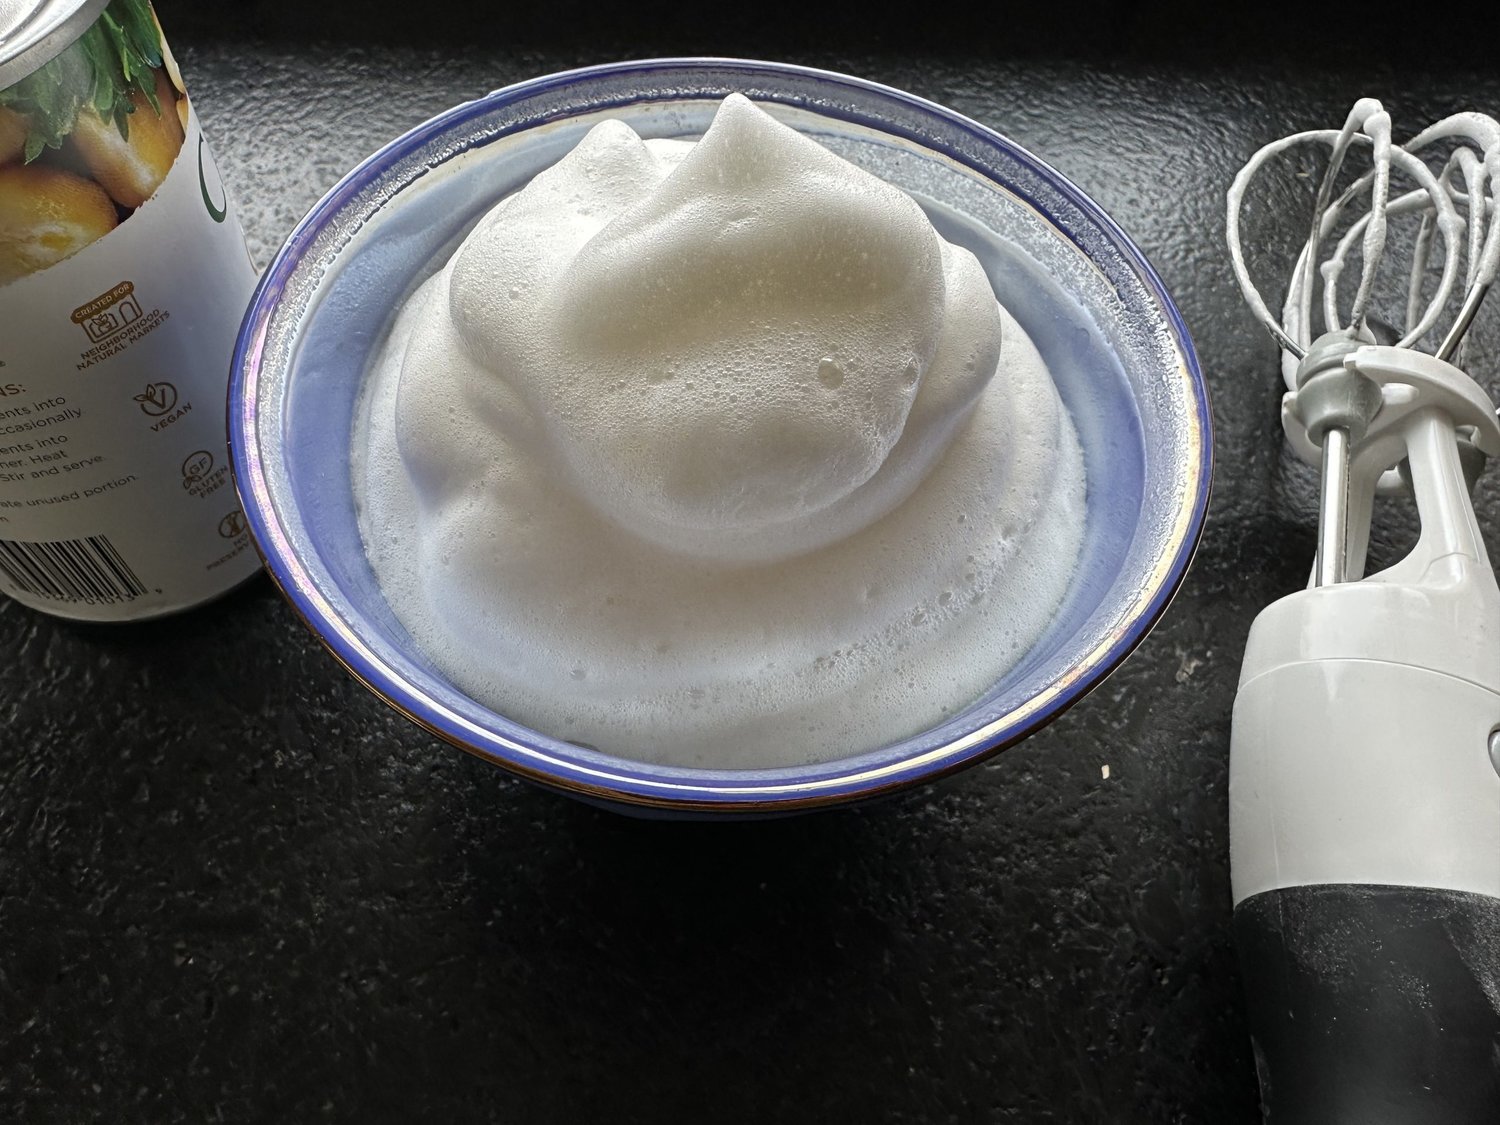 Aquafaba, the leftover liquid in a can of beans, is a cheap egg substitute to use during the current shortage. You can beat it stiff like egg whites, use it in baked goods and even emulsify it into mayonnaise.